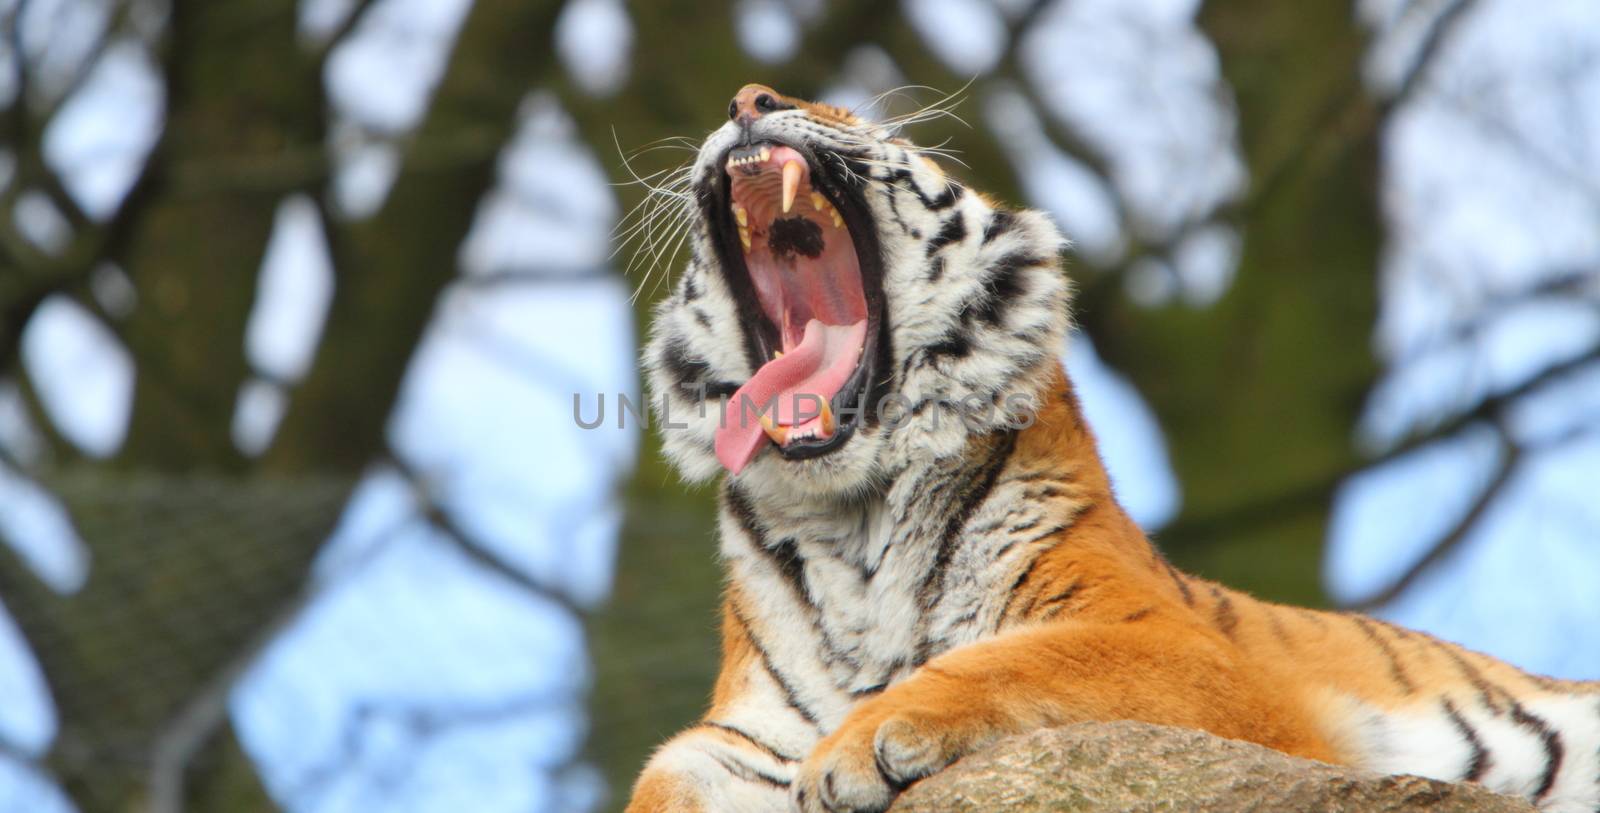 Siberian tiger (Panthera tigris altaica) by mitzy